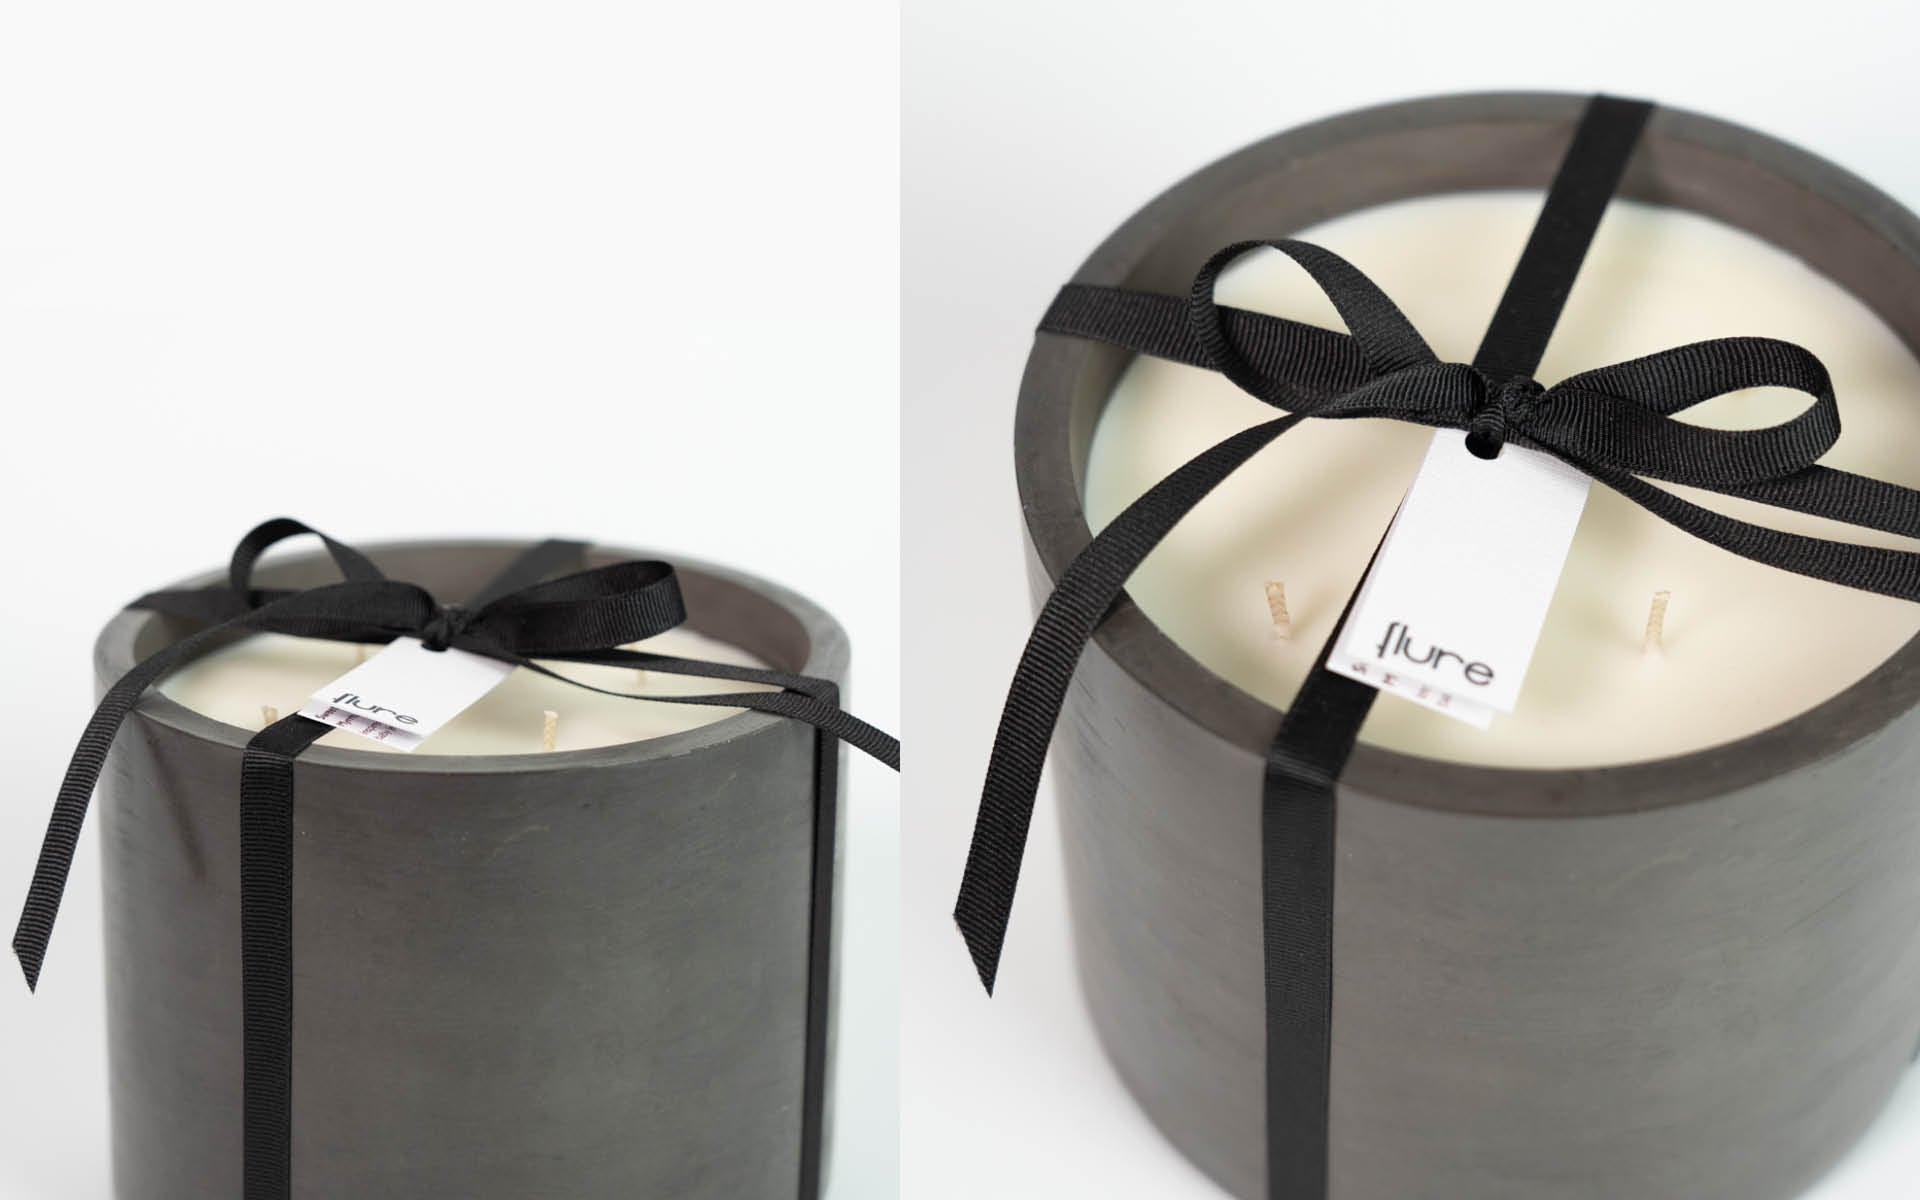 oversized luxury candle brand flure from new zealand is a stunning high end brand